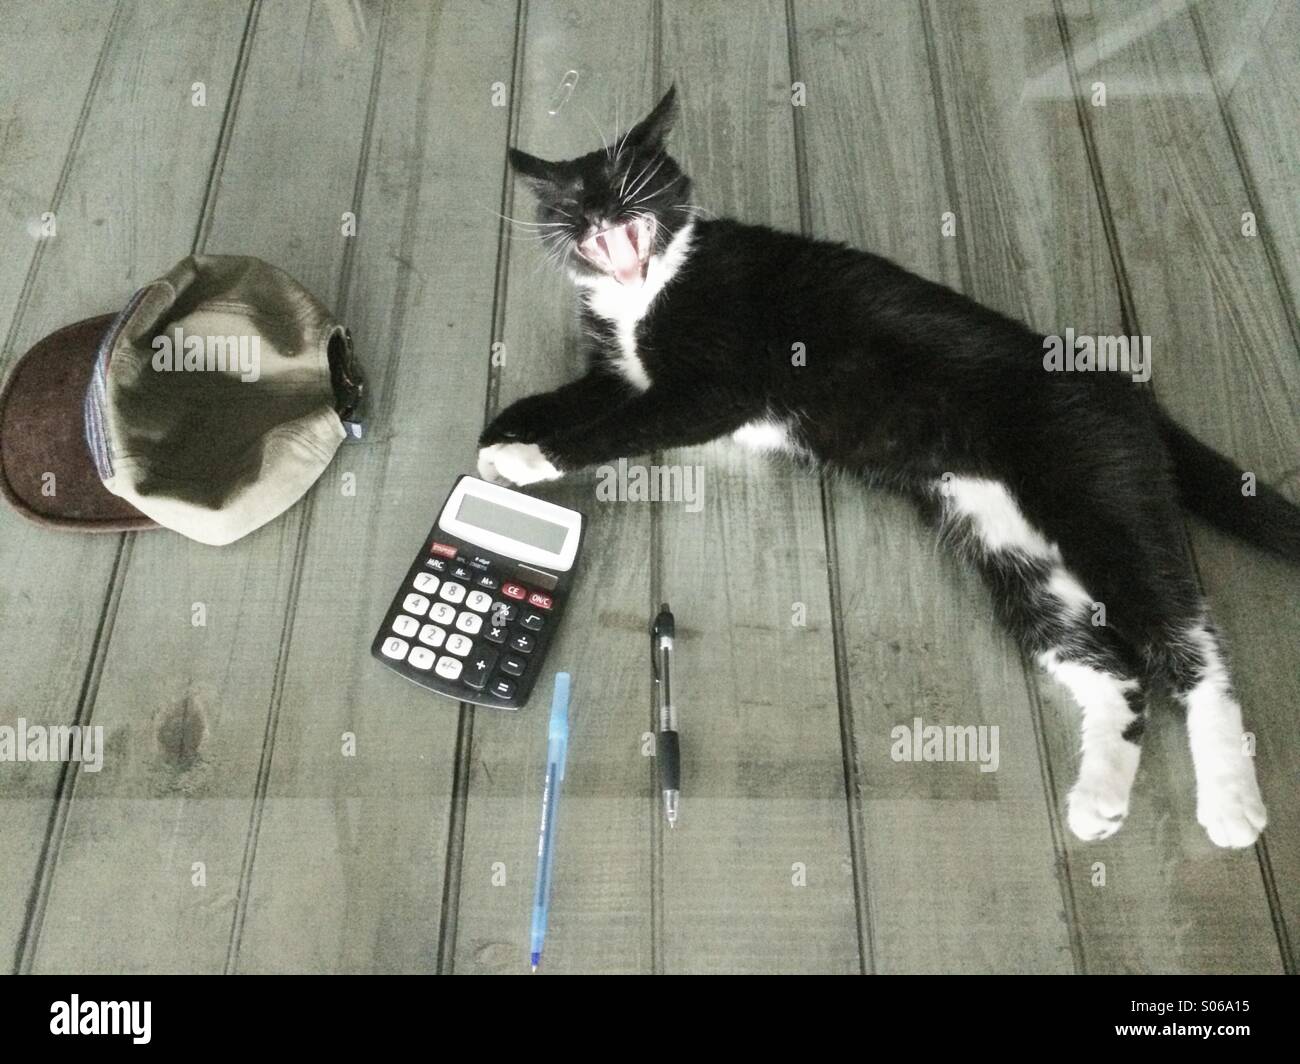 A black and white cat lying on a table yawning, next to a calculator, pens, and a baseball cap. Stock Photo